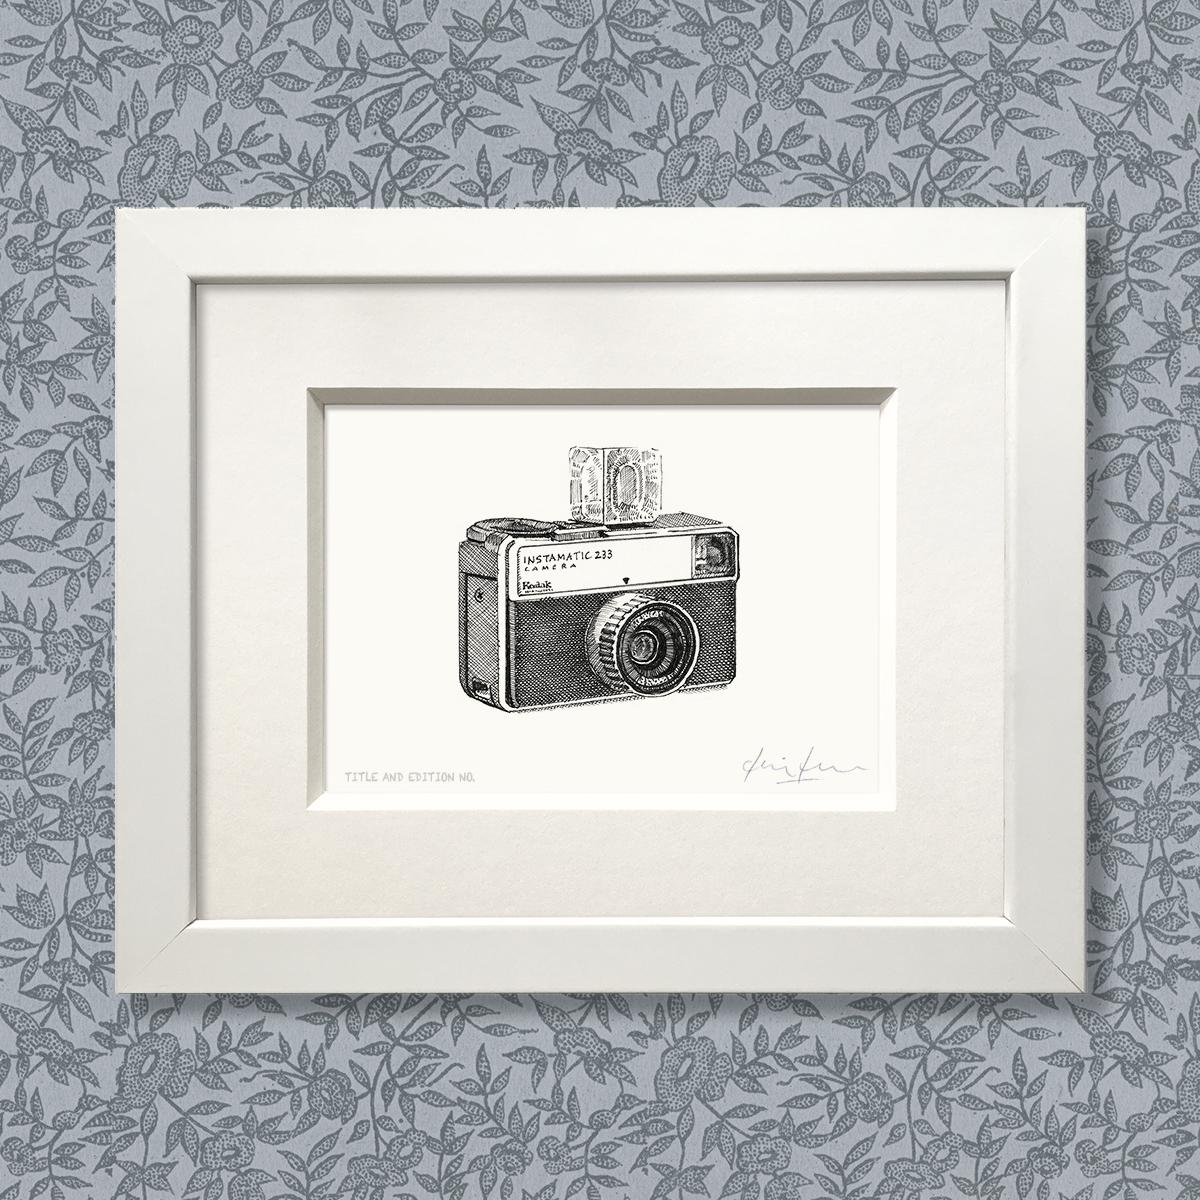 Limited edition print from pen and ink drawing of an old Instamatic camera in a white mount